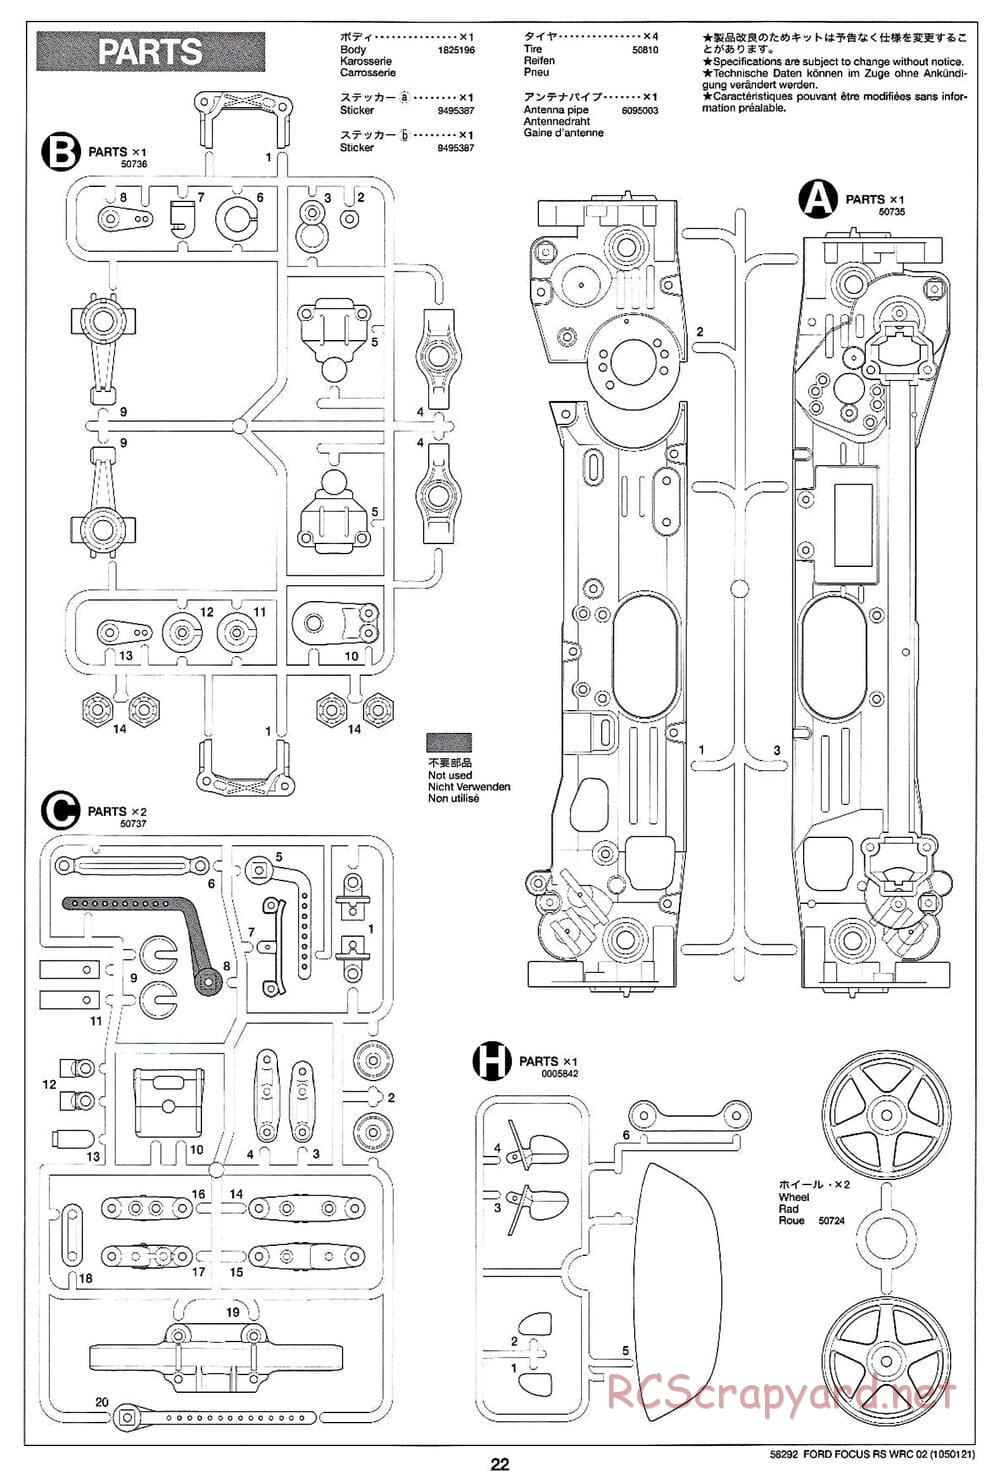 Tamiya - Ford Focus RS WRC 02 - TL-01 Chassis - Manual - Page 22